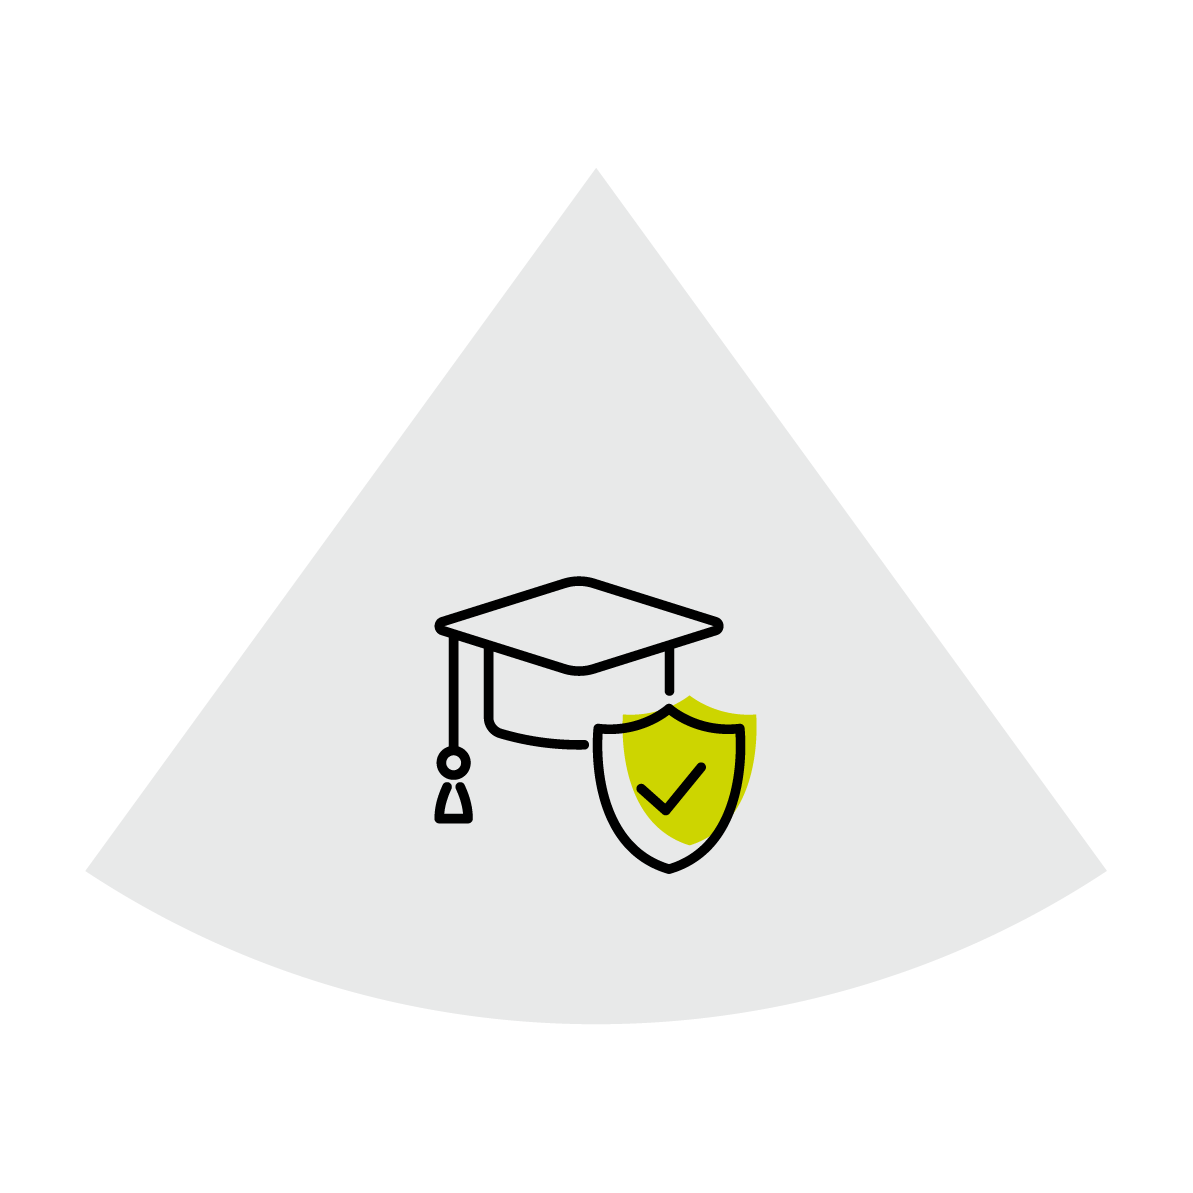 An icon showing a mortarboard